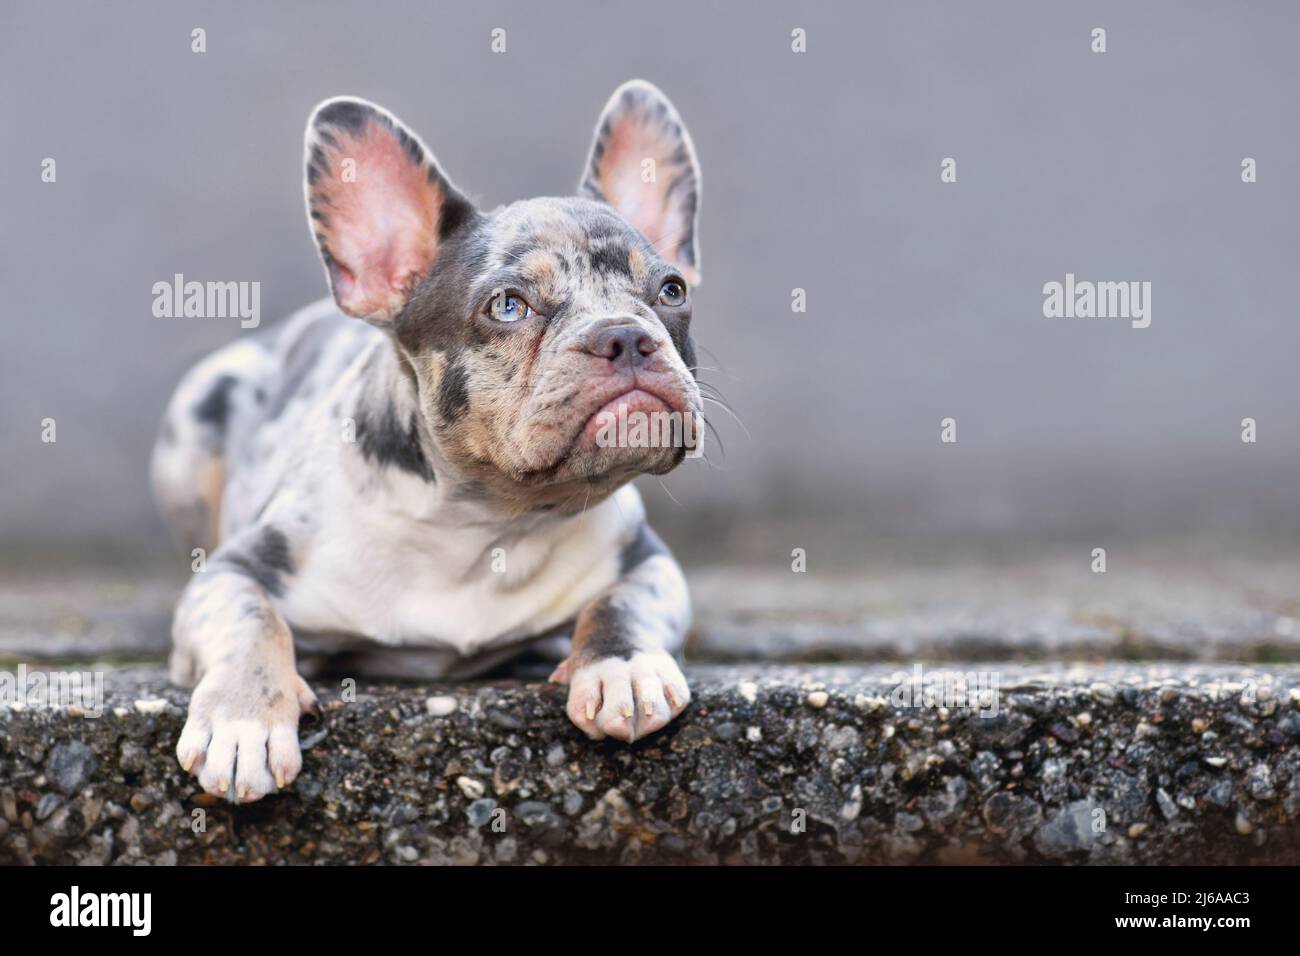 Young blue merle tan French Bulldog dog lying down in front of gray wall Stock Photo